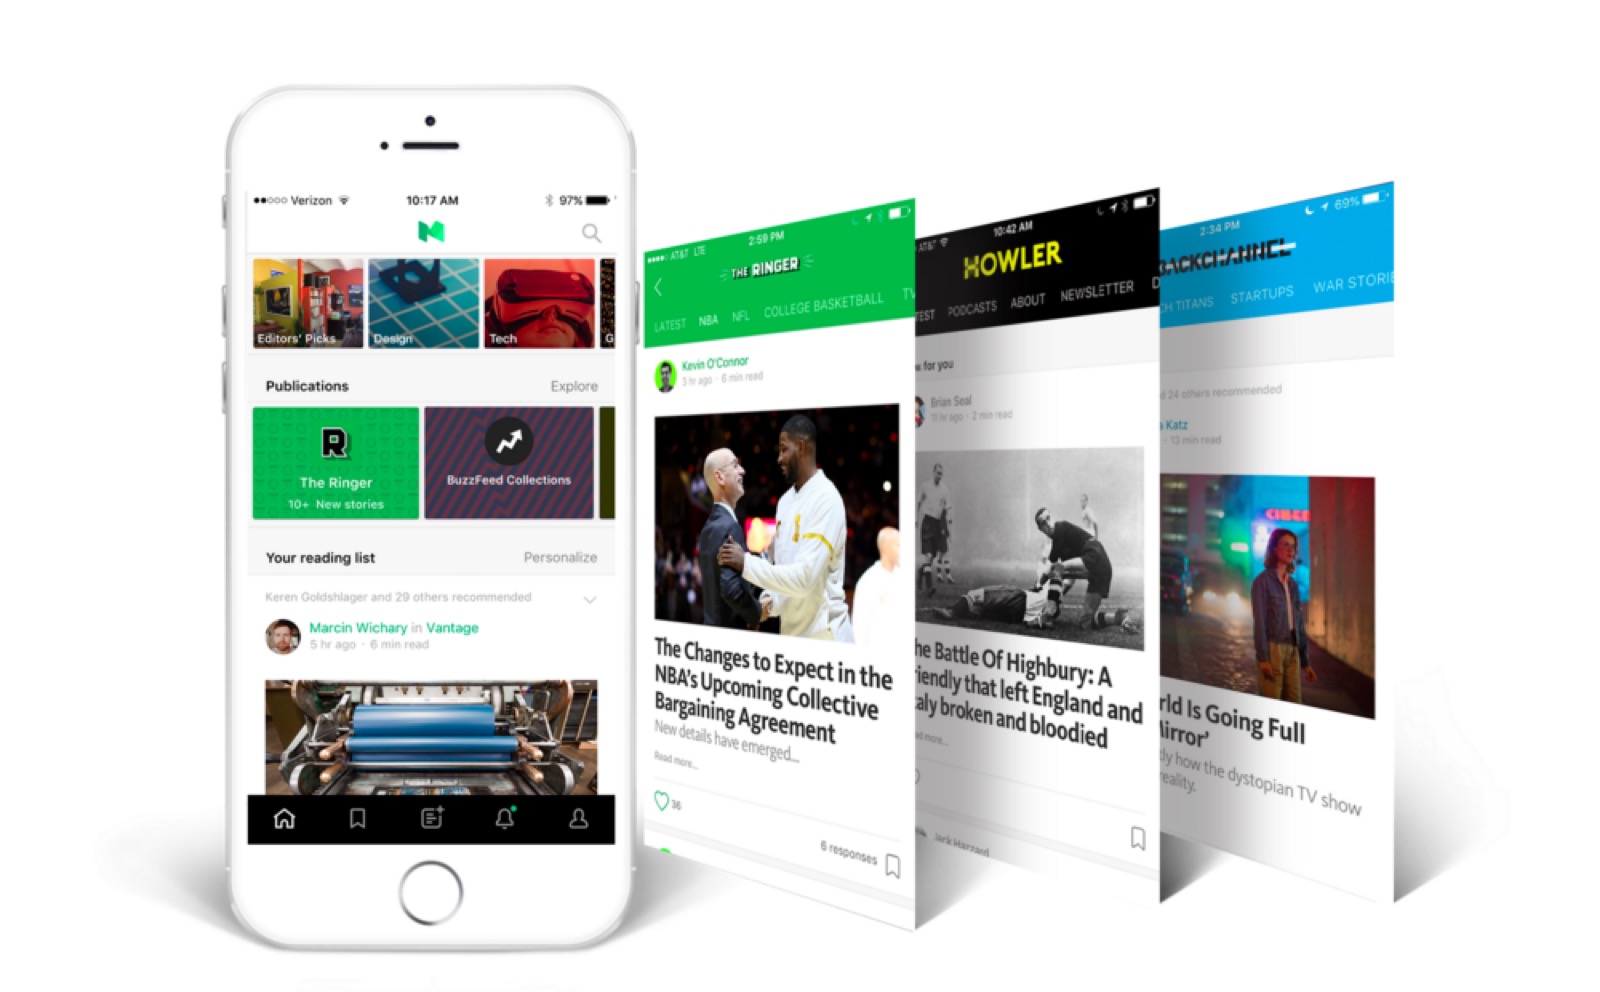 Medium makes publications more prominent in its apps